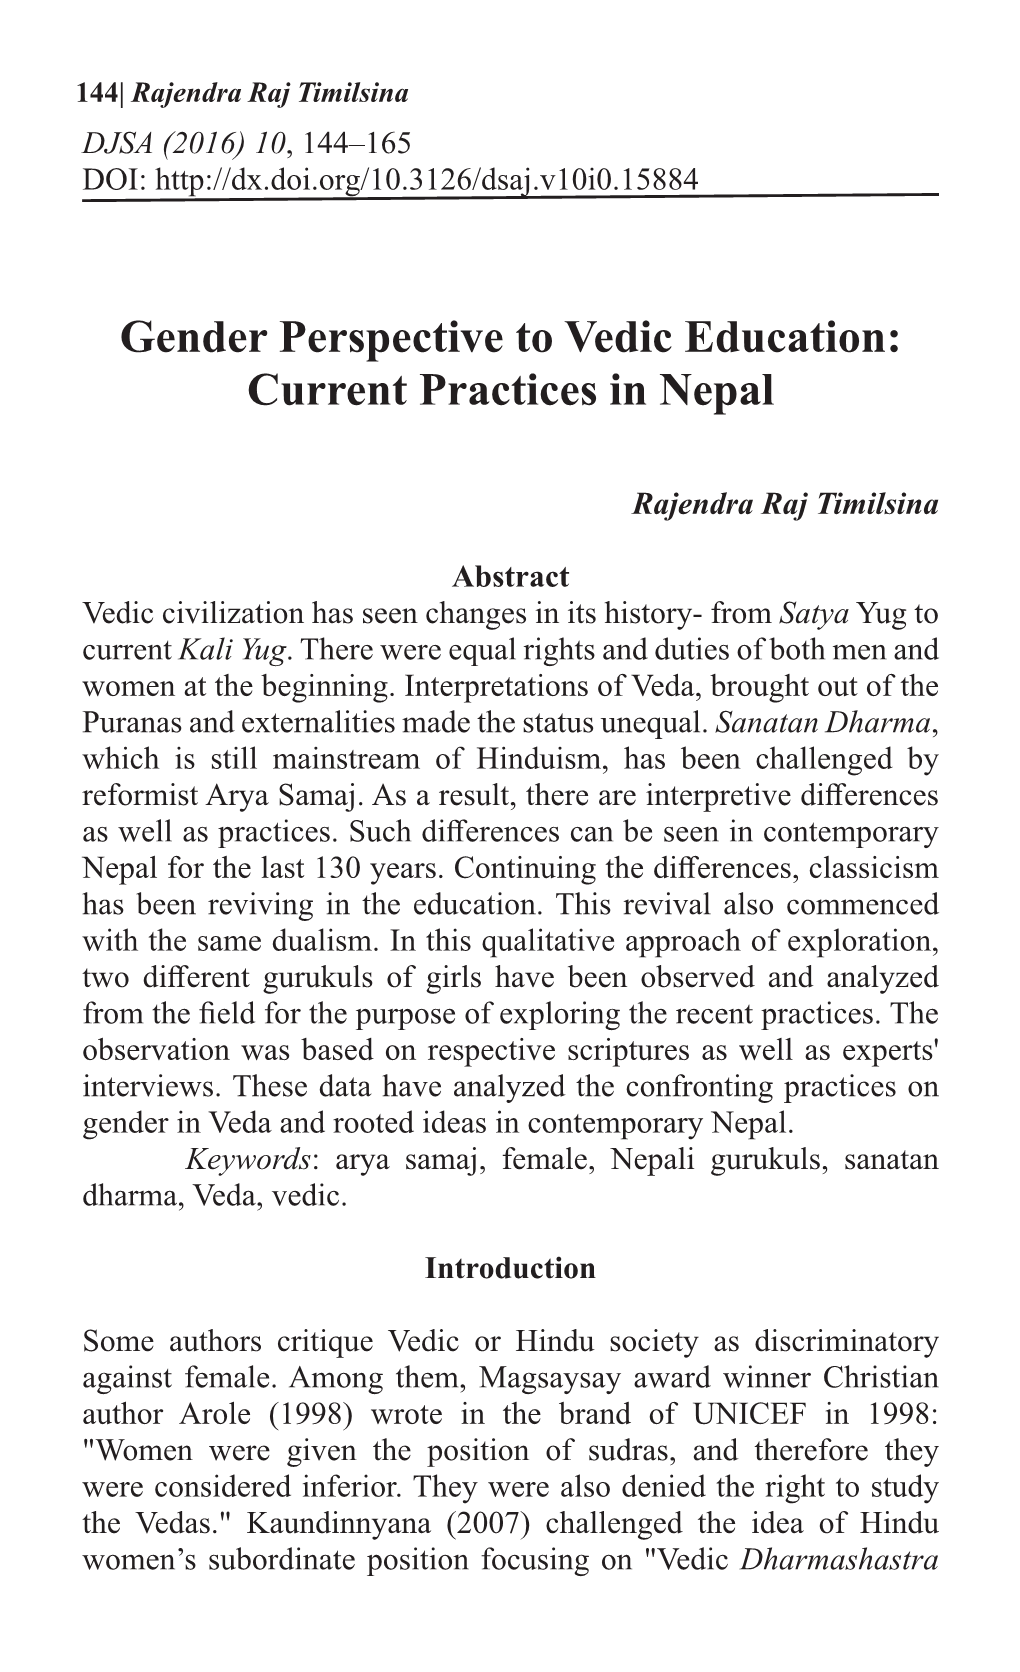 Gender Perspective to Vedic Education: Current Practices in Nepal